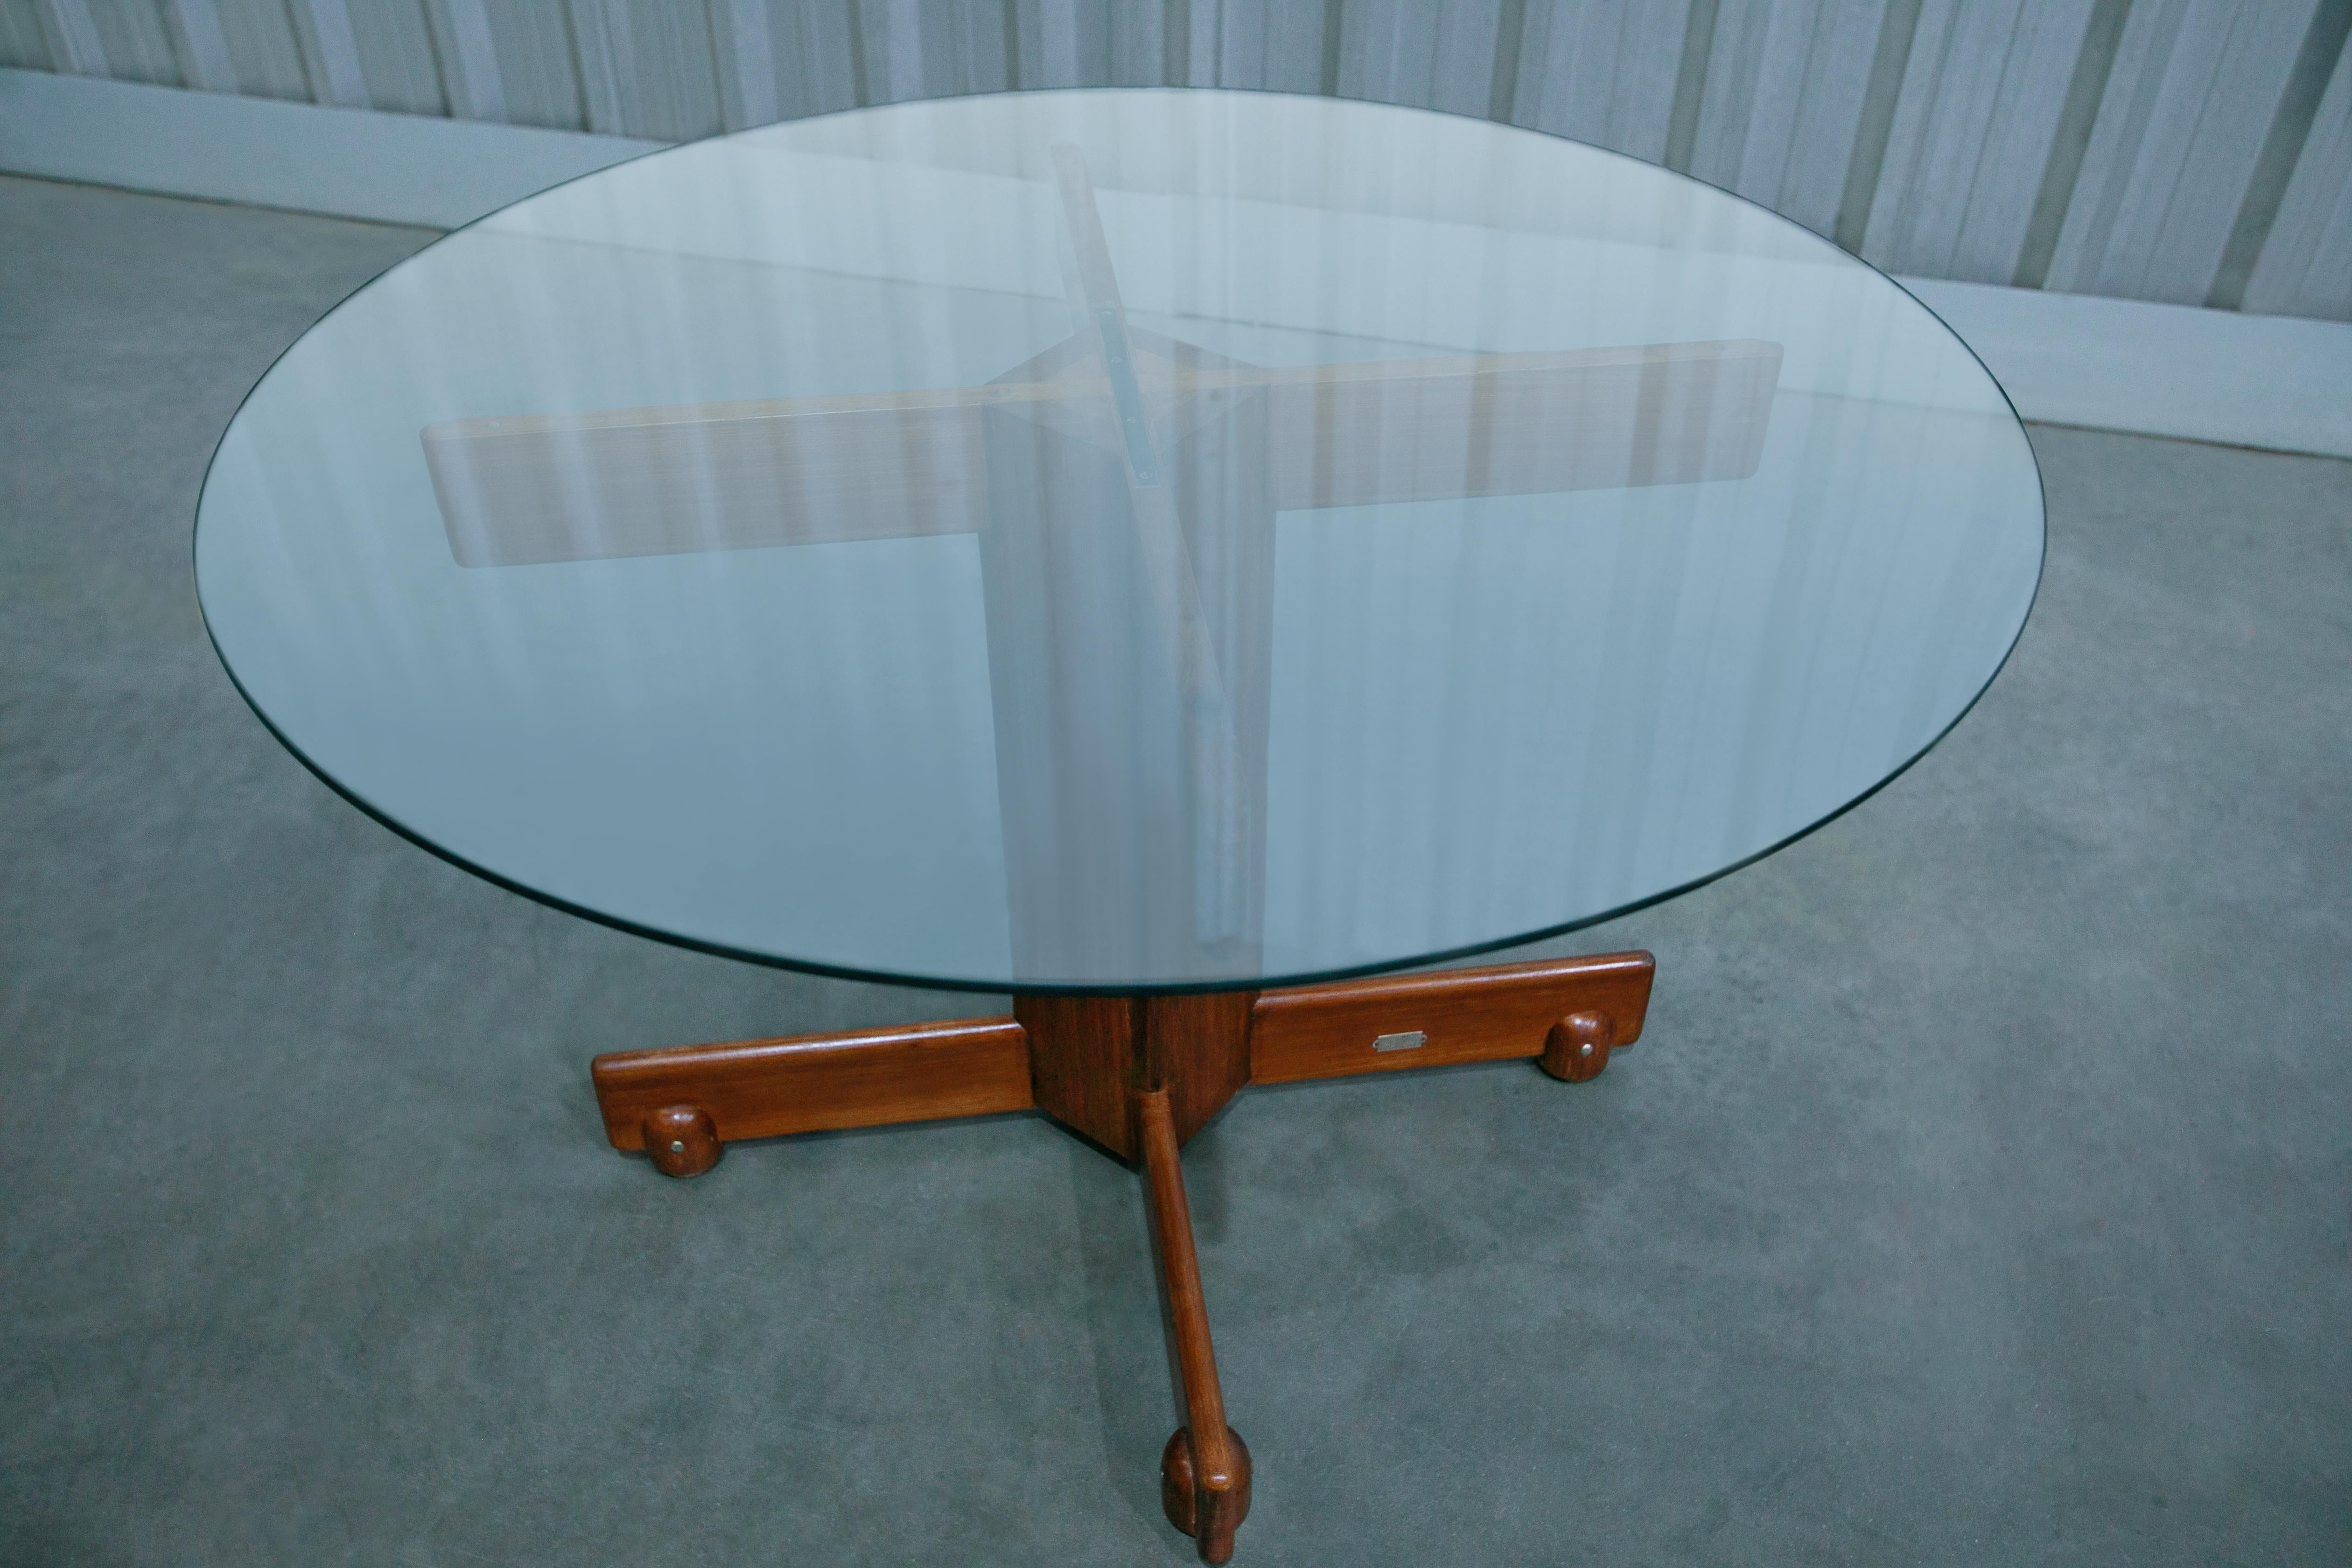 This “Alex” dining table perfectly represents the Brazilian modernist movement and the architects hired to design and furnish the new capital Brasilia in 1960. It belonged to Furnas, a regional power utility and major subsidiary of Eletrobras